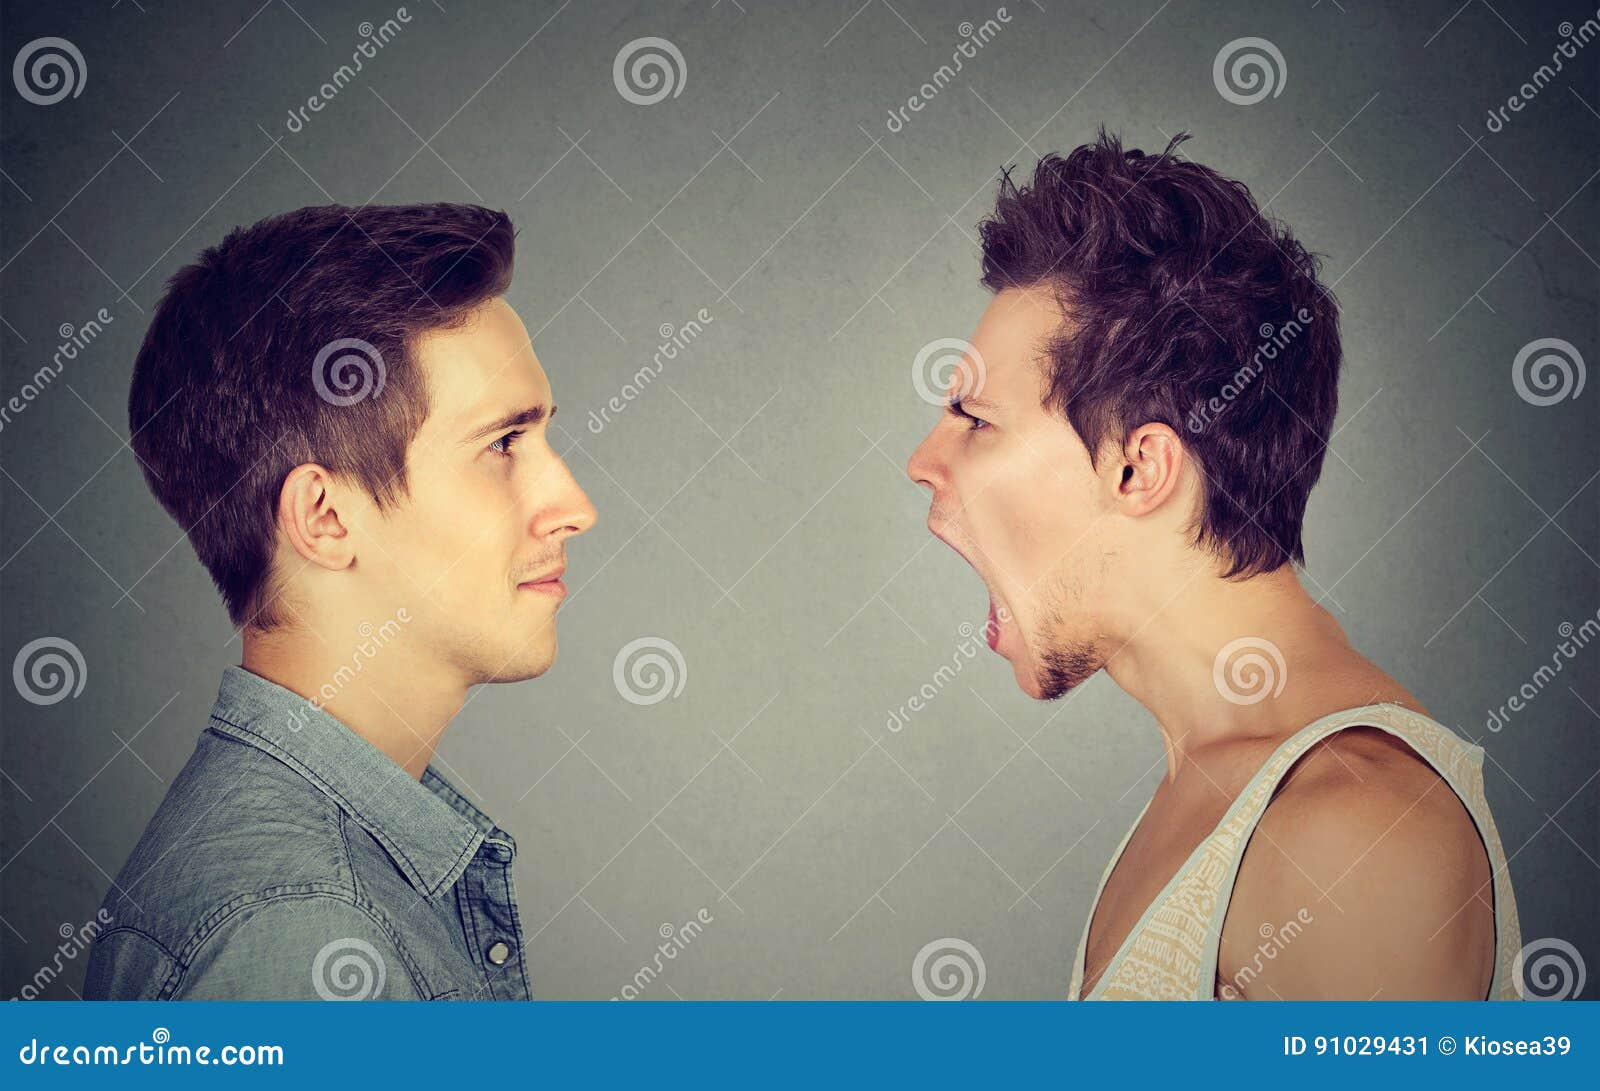 side profile portrait of young angry man screaming at a calm smiling guy